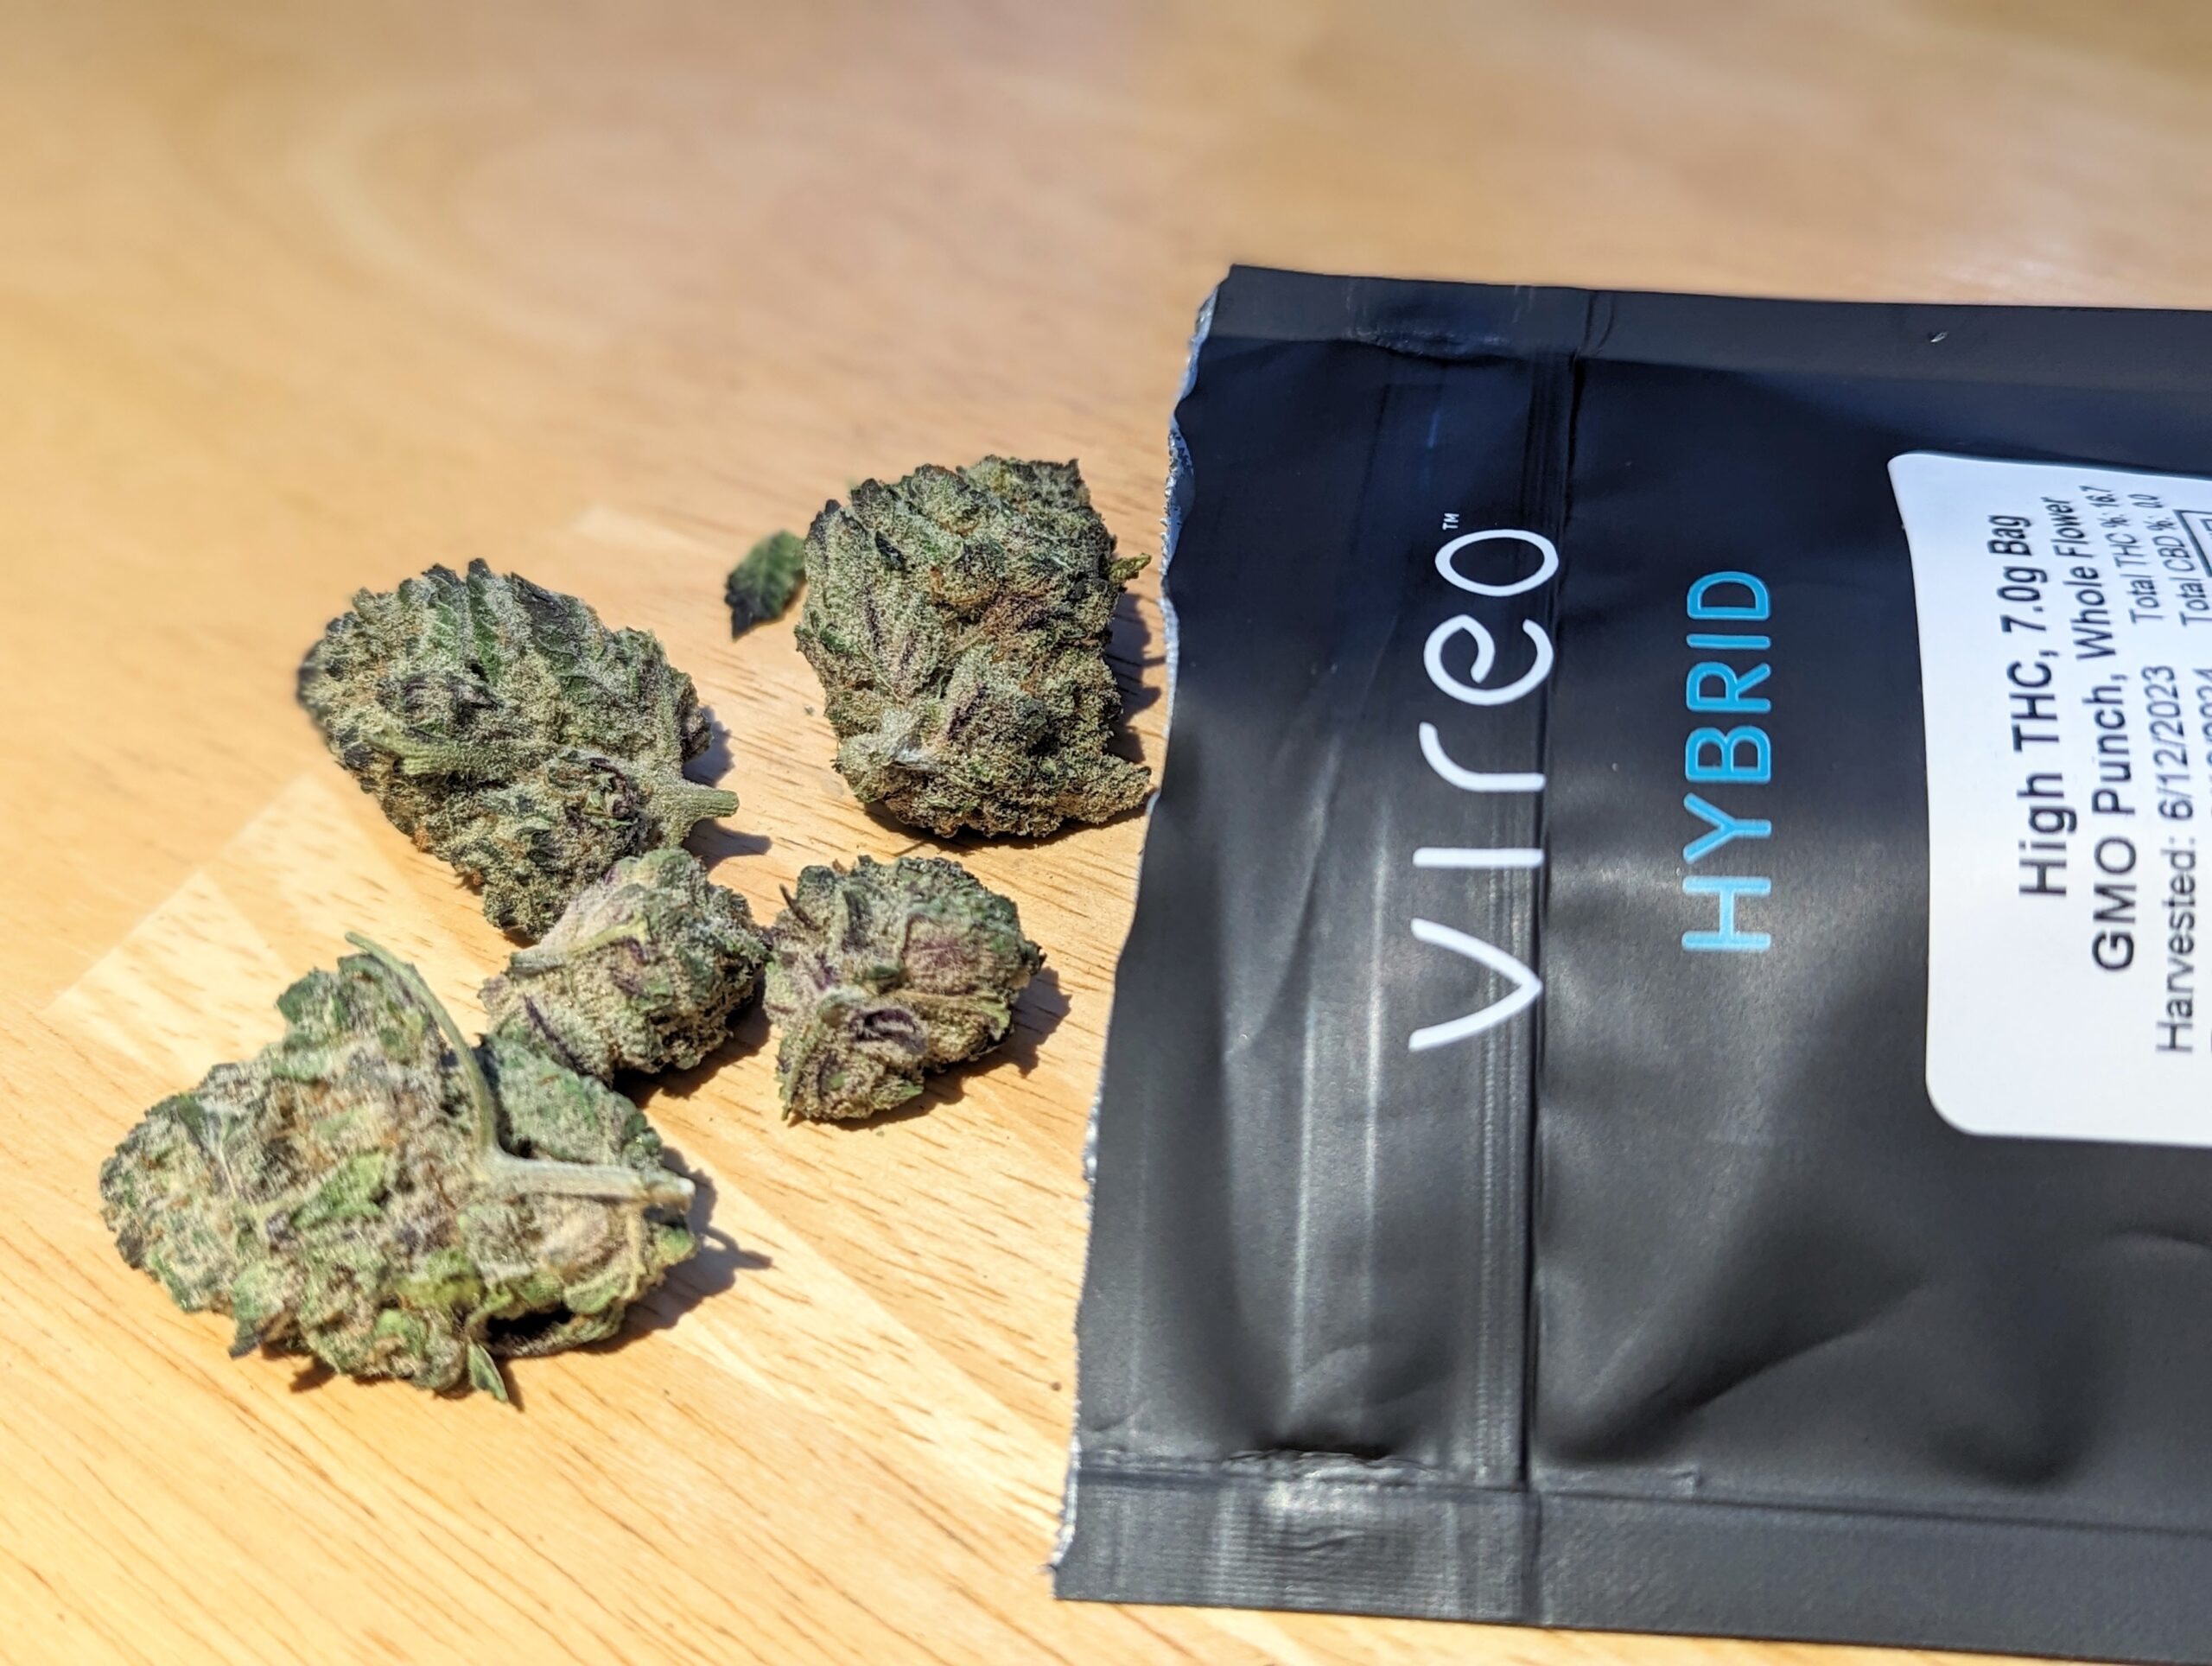 An image of cannabis falling out of a medical dispensary bag on a table.